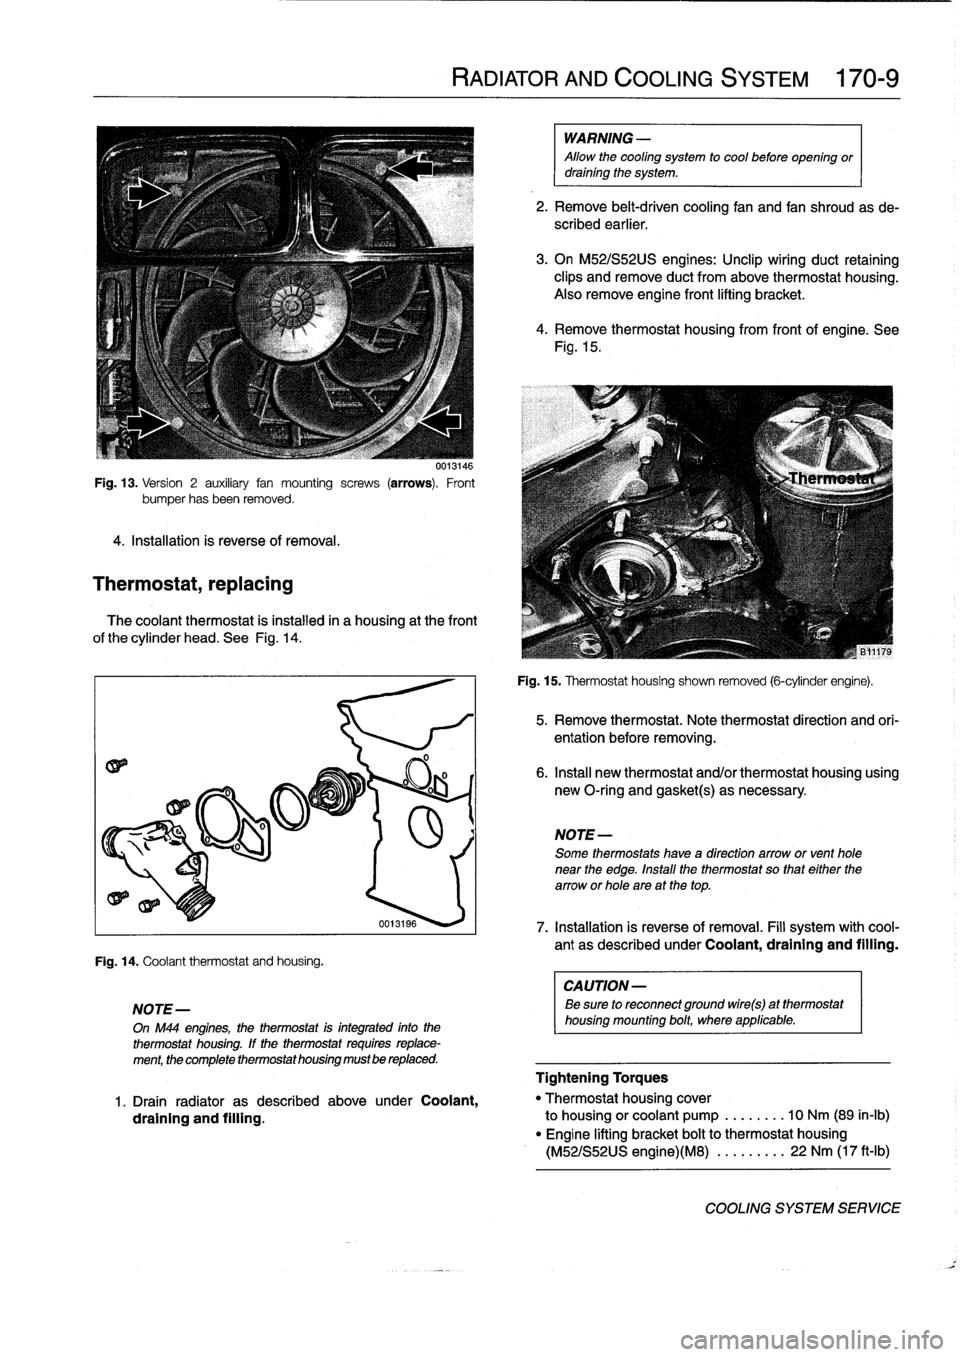 BMW 318i 1994 E36 Workshop Manual 
Fig
.
13
.
Version
2
auxiliary
fan
mounting
screws
(arrows)
.
Front
bumper
hasbeen
removed
.

4
.
Installation
is
reverse
of
removal
.

Thermostat,
replacing

0013146

The
coolant
thermostat
is
insta